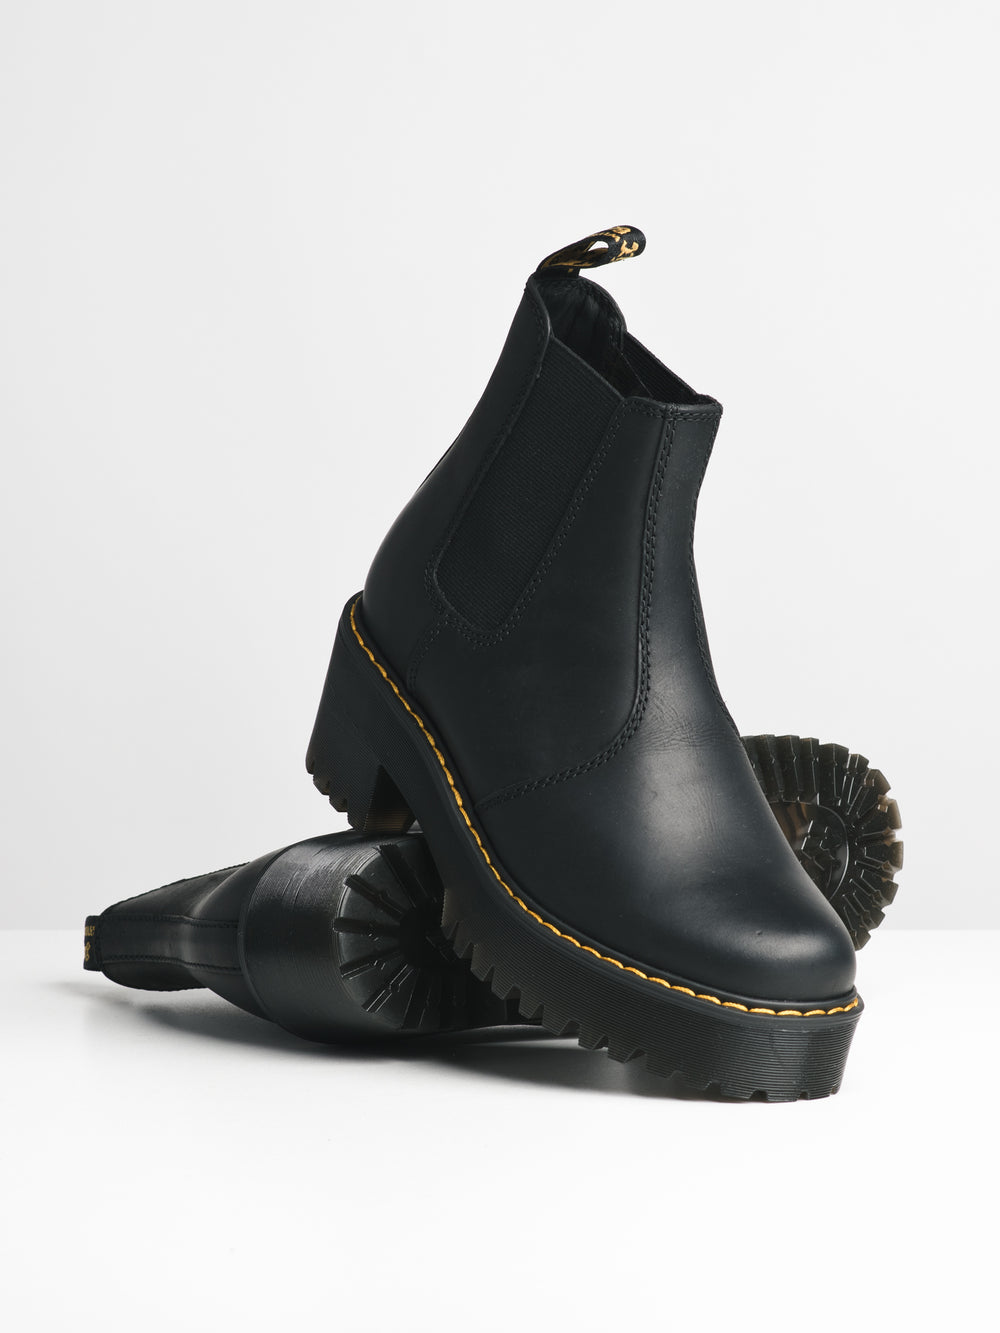 WOMENS DR MARTENS ROMETTY BOOTS